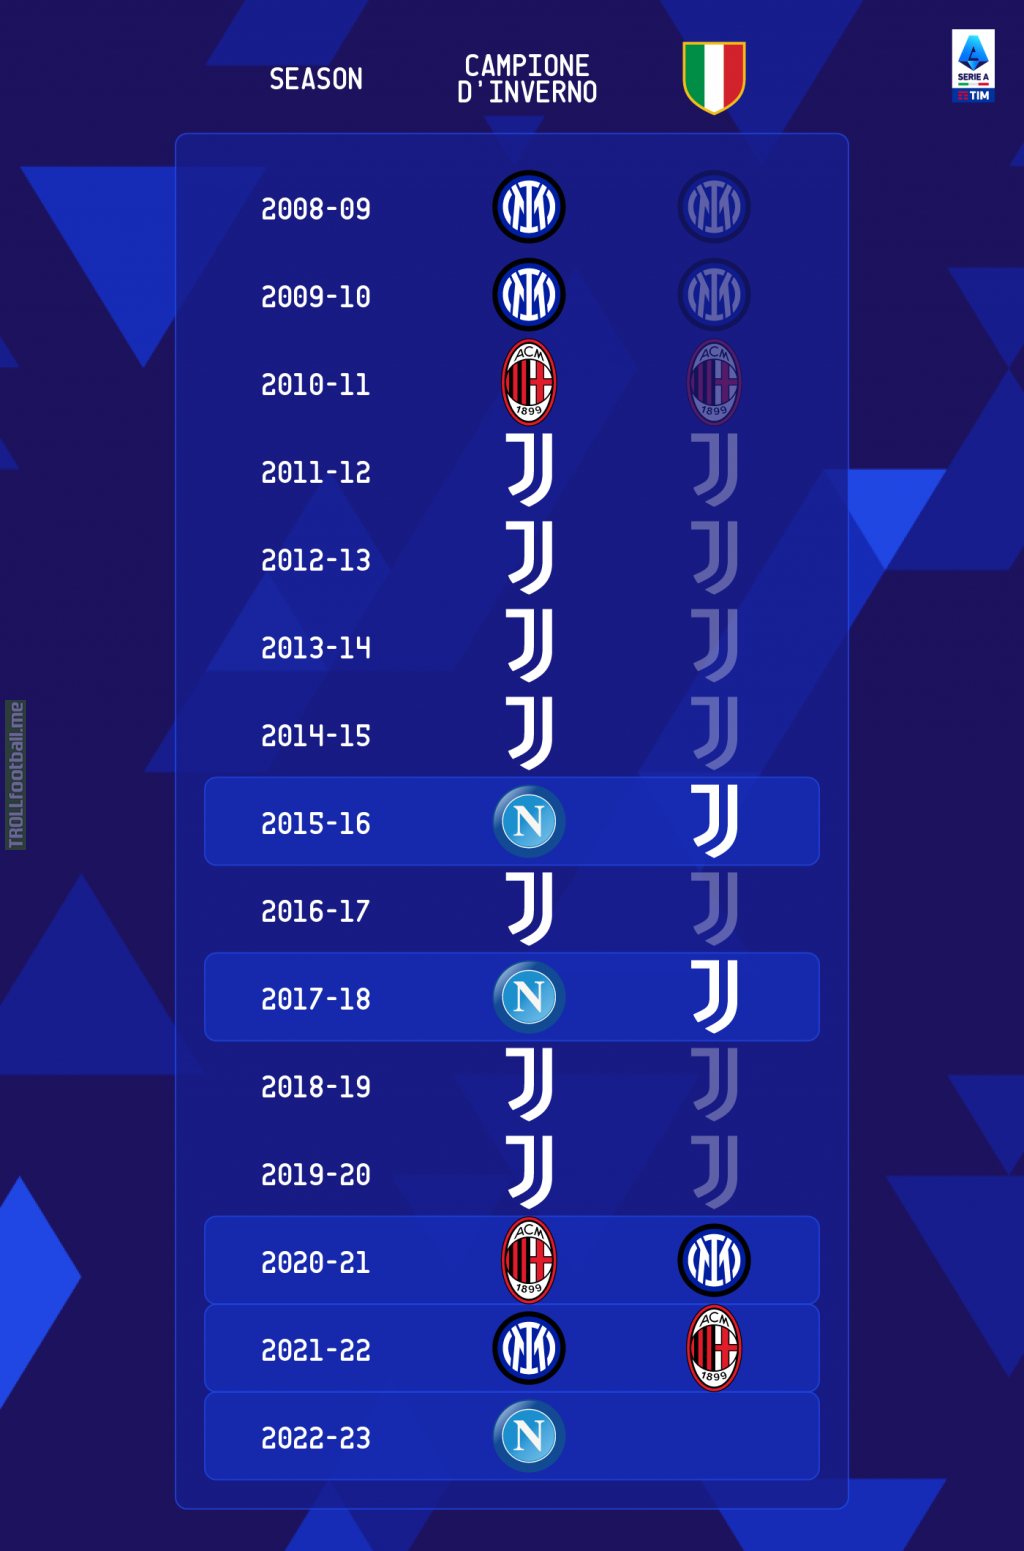 Serie A Winter Champions in the last 15 years (top of table at half season)